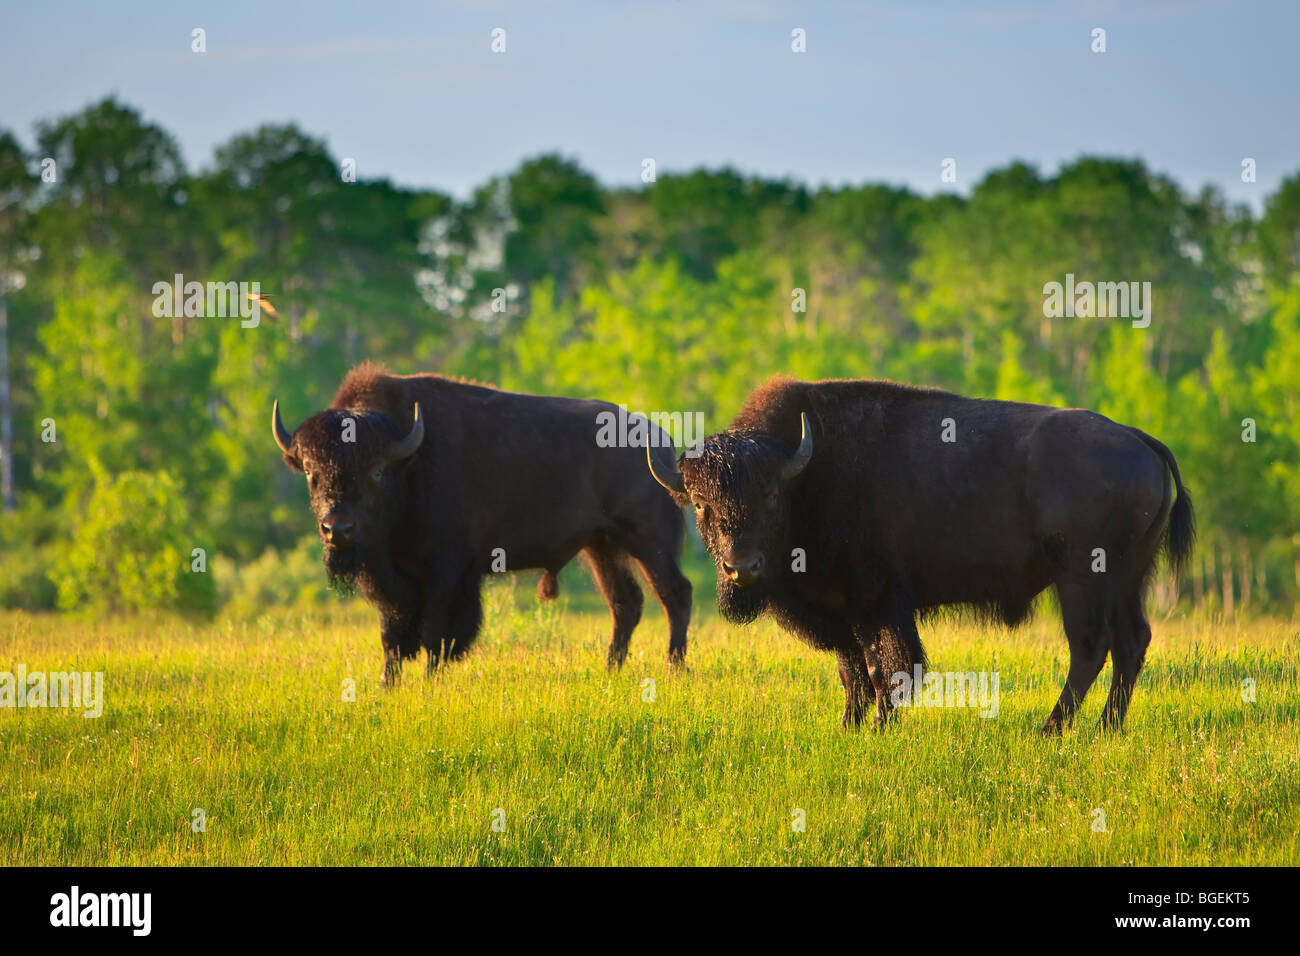 Bison roaming freely in the Bison Enclosure in Riding Mountain National Park, Manitoba, Canada. Stock Photo